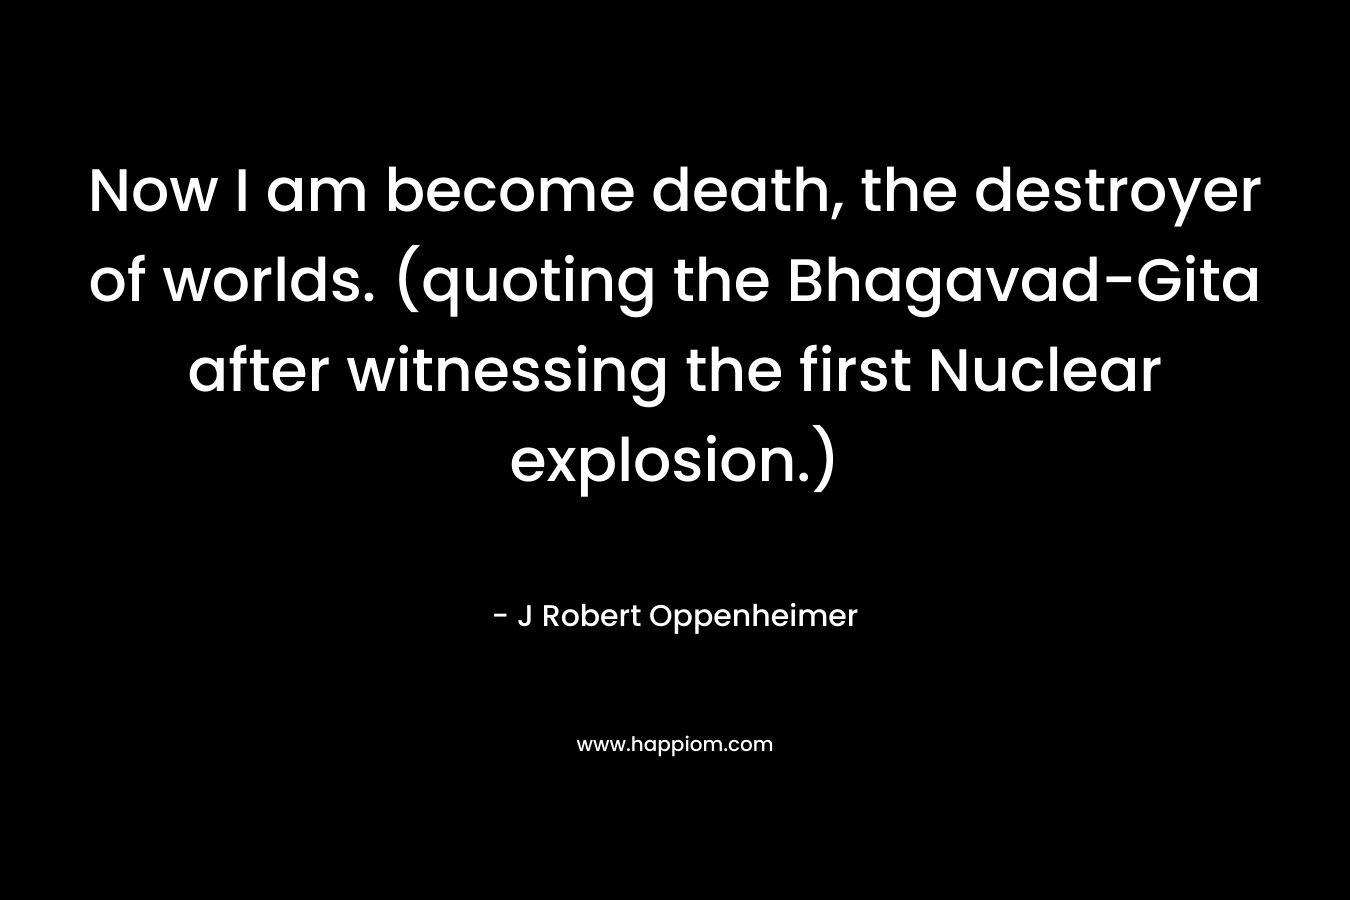 Now I am become death, the destroyer of worlds. (quoting the Bhagavad-Gita after witnessing the first Nuclear explosion.)